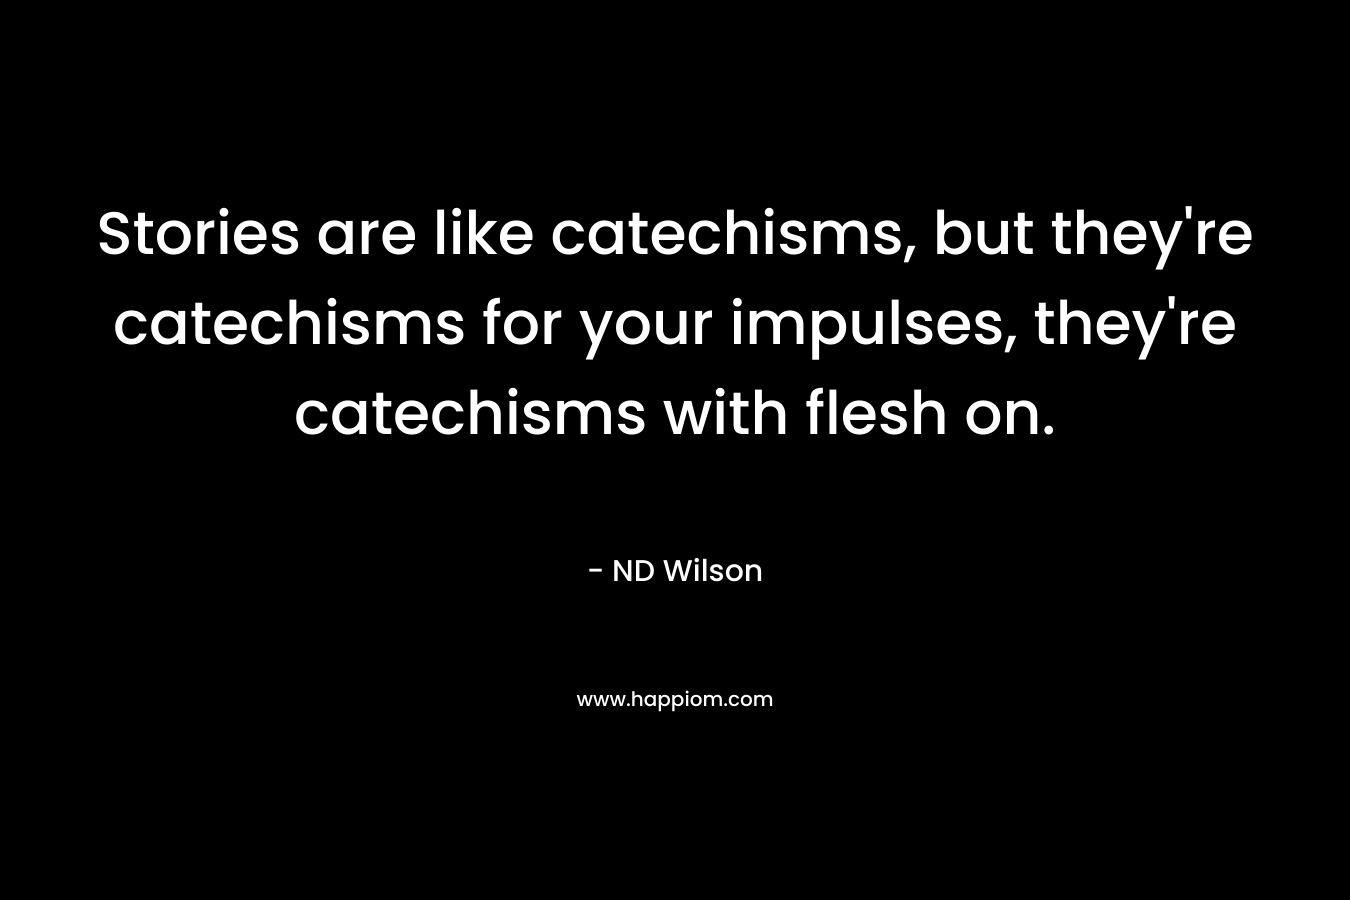 Stories are like catechisms, but they're catechisms for your impulses, they're catechisms with flesh on.